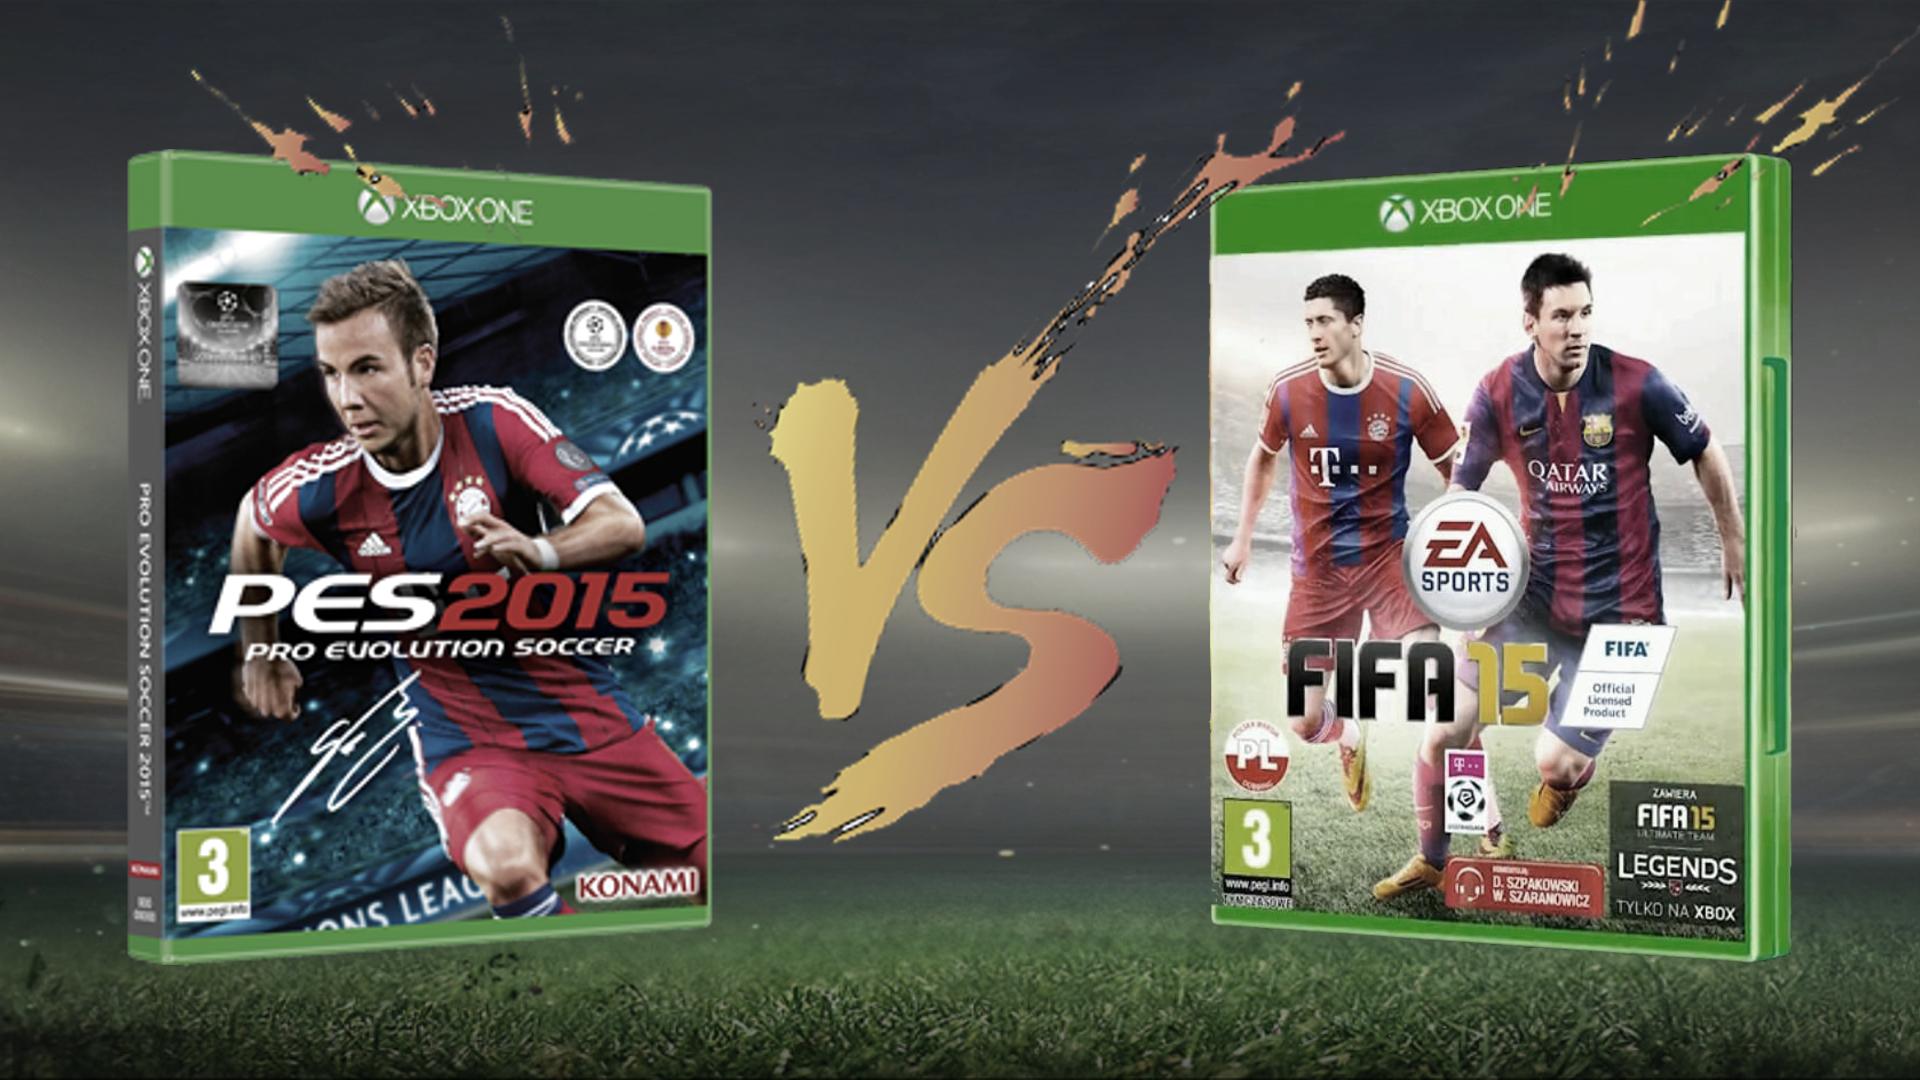 The annual match up between EA SPORTS and Konami has kicked off